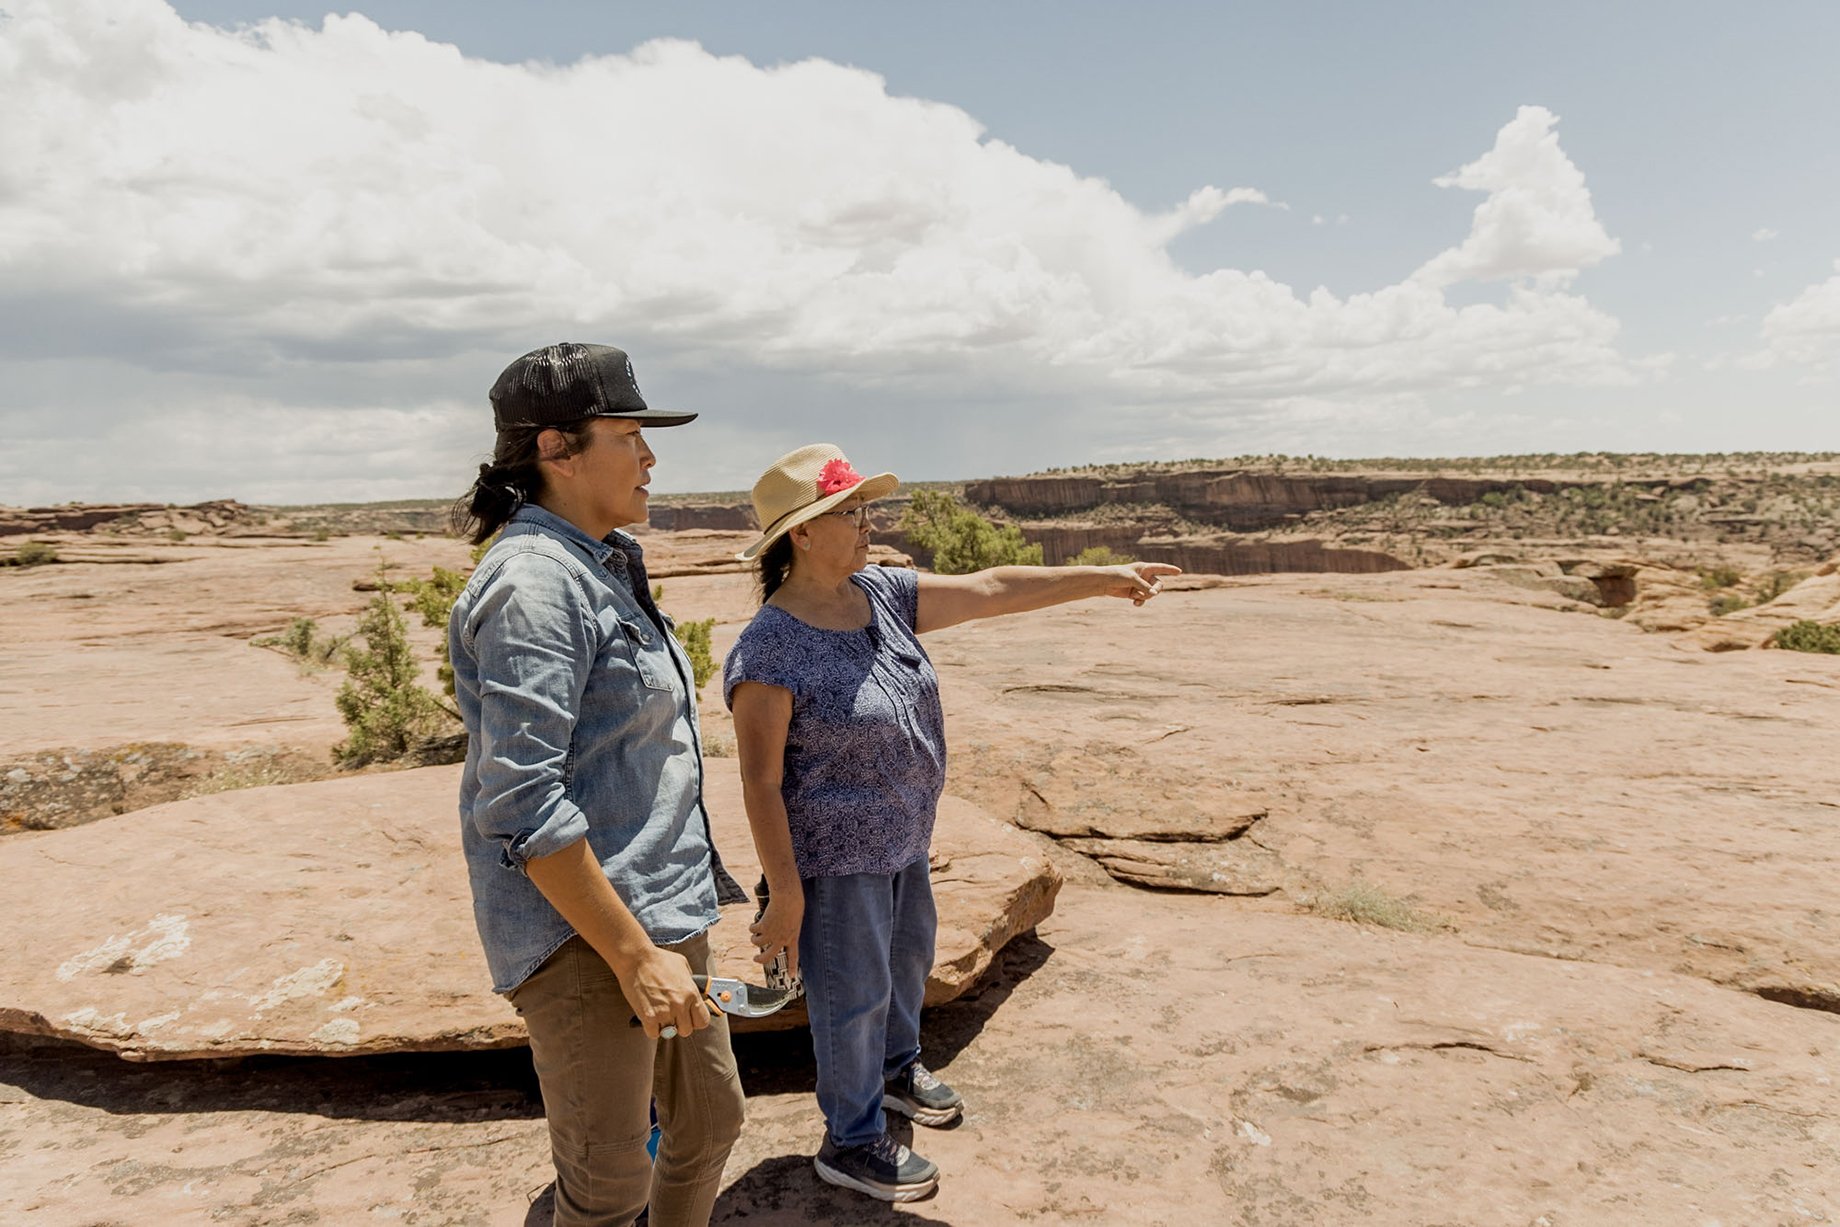 Missy Begay and her mom foraging for ingredients on Canyon de Chelly shot by Minesh Bacarina for Outside Magazine